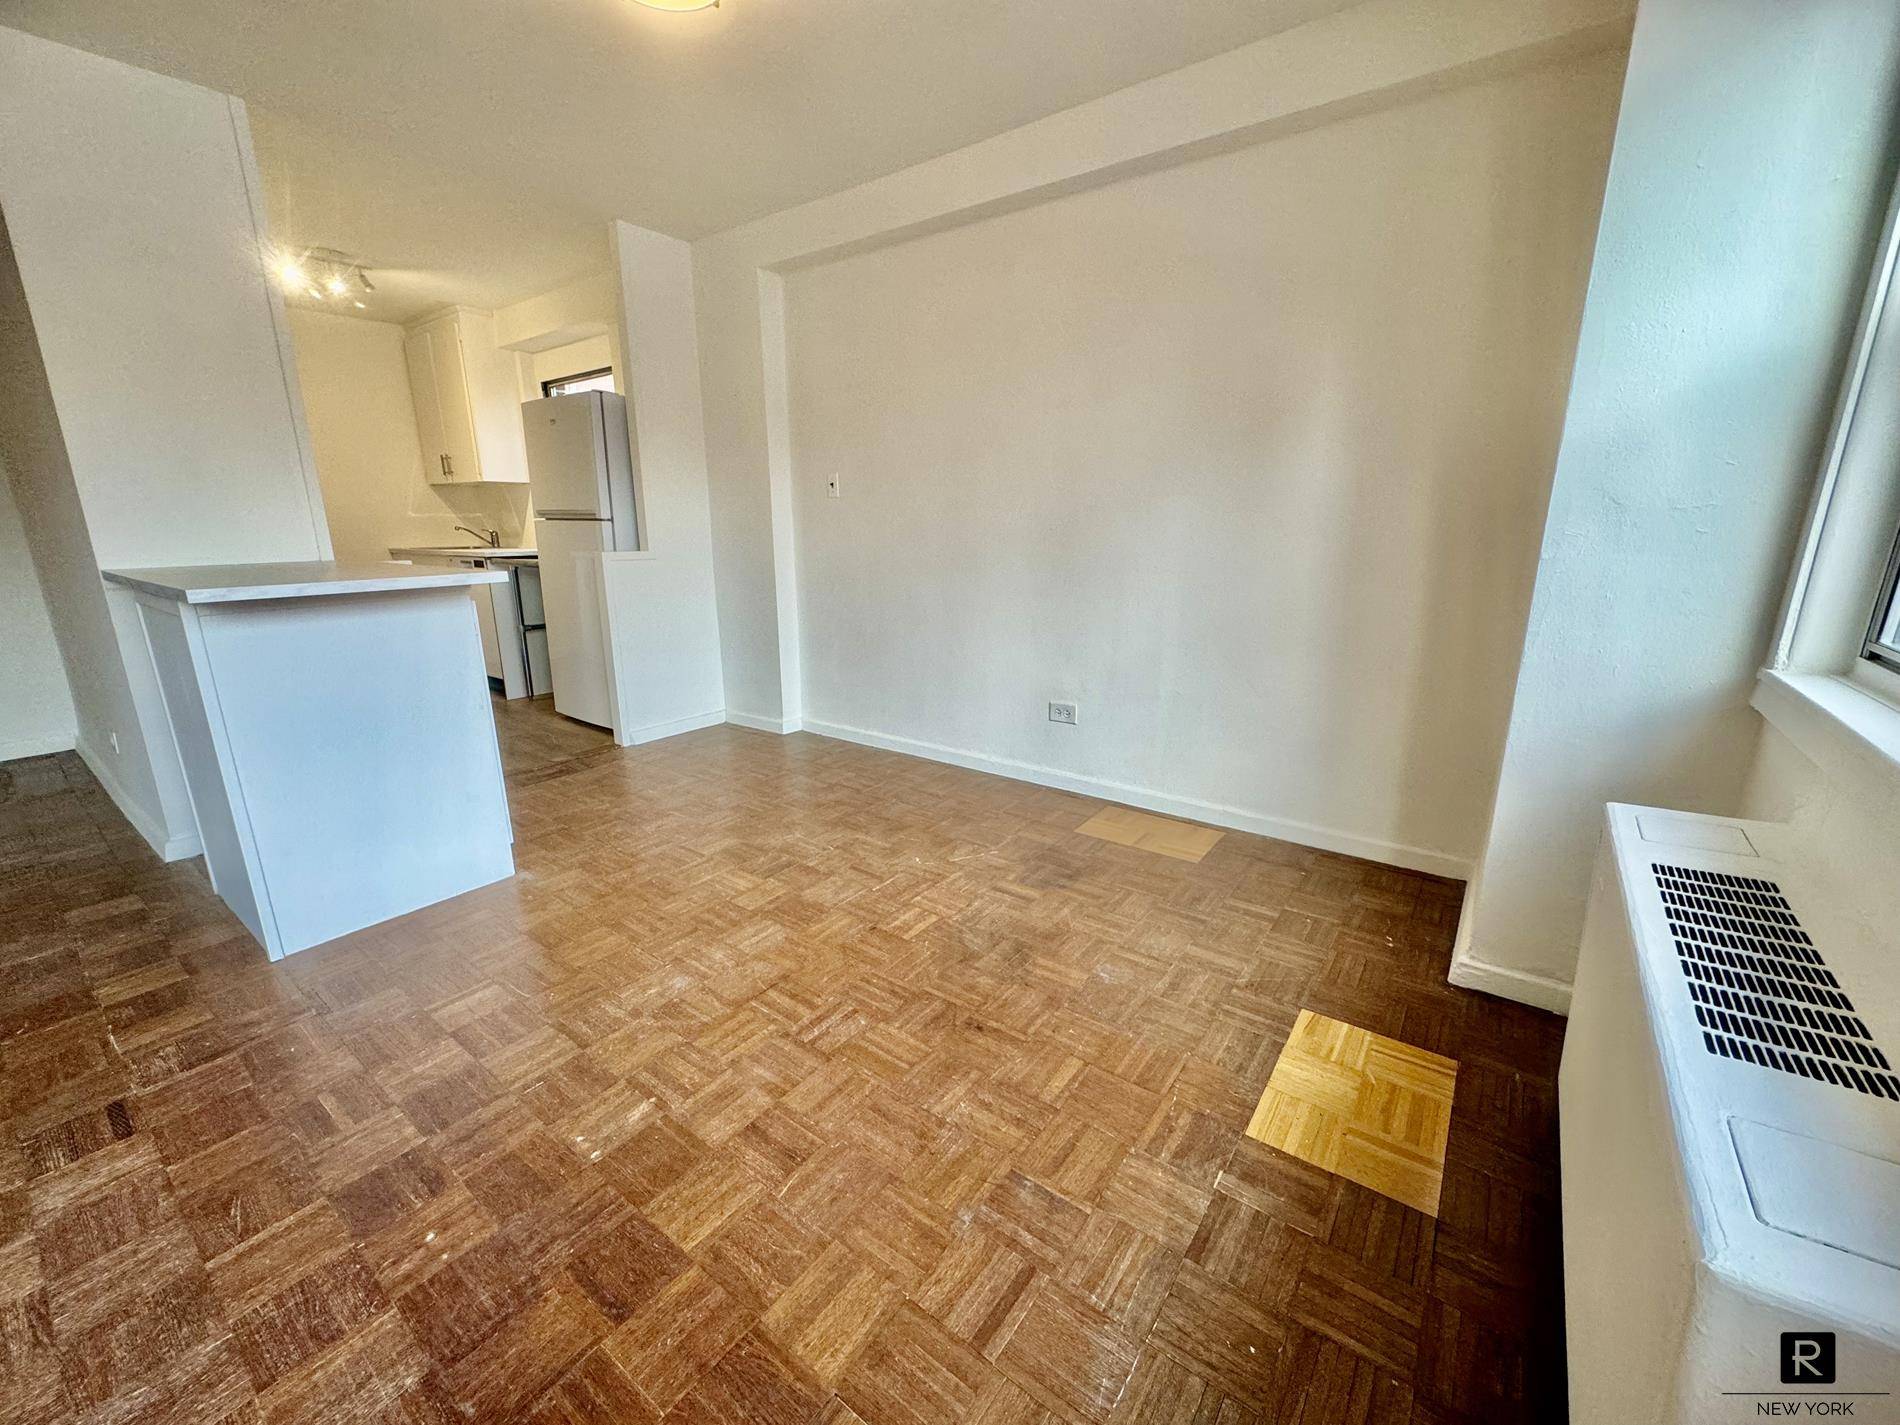 SPONSOR UNIT NO BOARD APPROVAL QUICK AND EASY PROCESS 2nd MONTH COMPLIMENTARY RENT to help offset some fees JUST 3 1 2 BLOCKS AWAY FROM THE ENTRANCE of the NEW ...